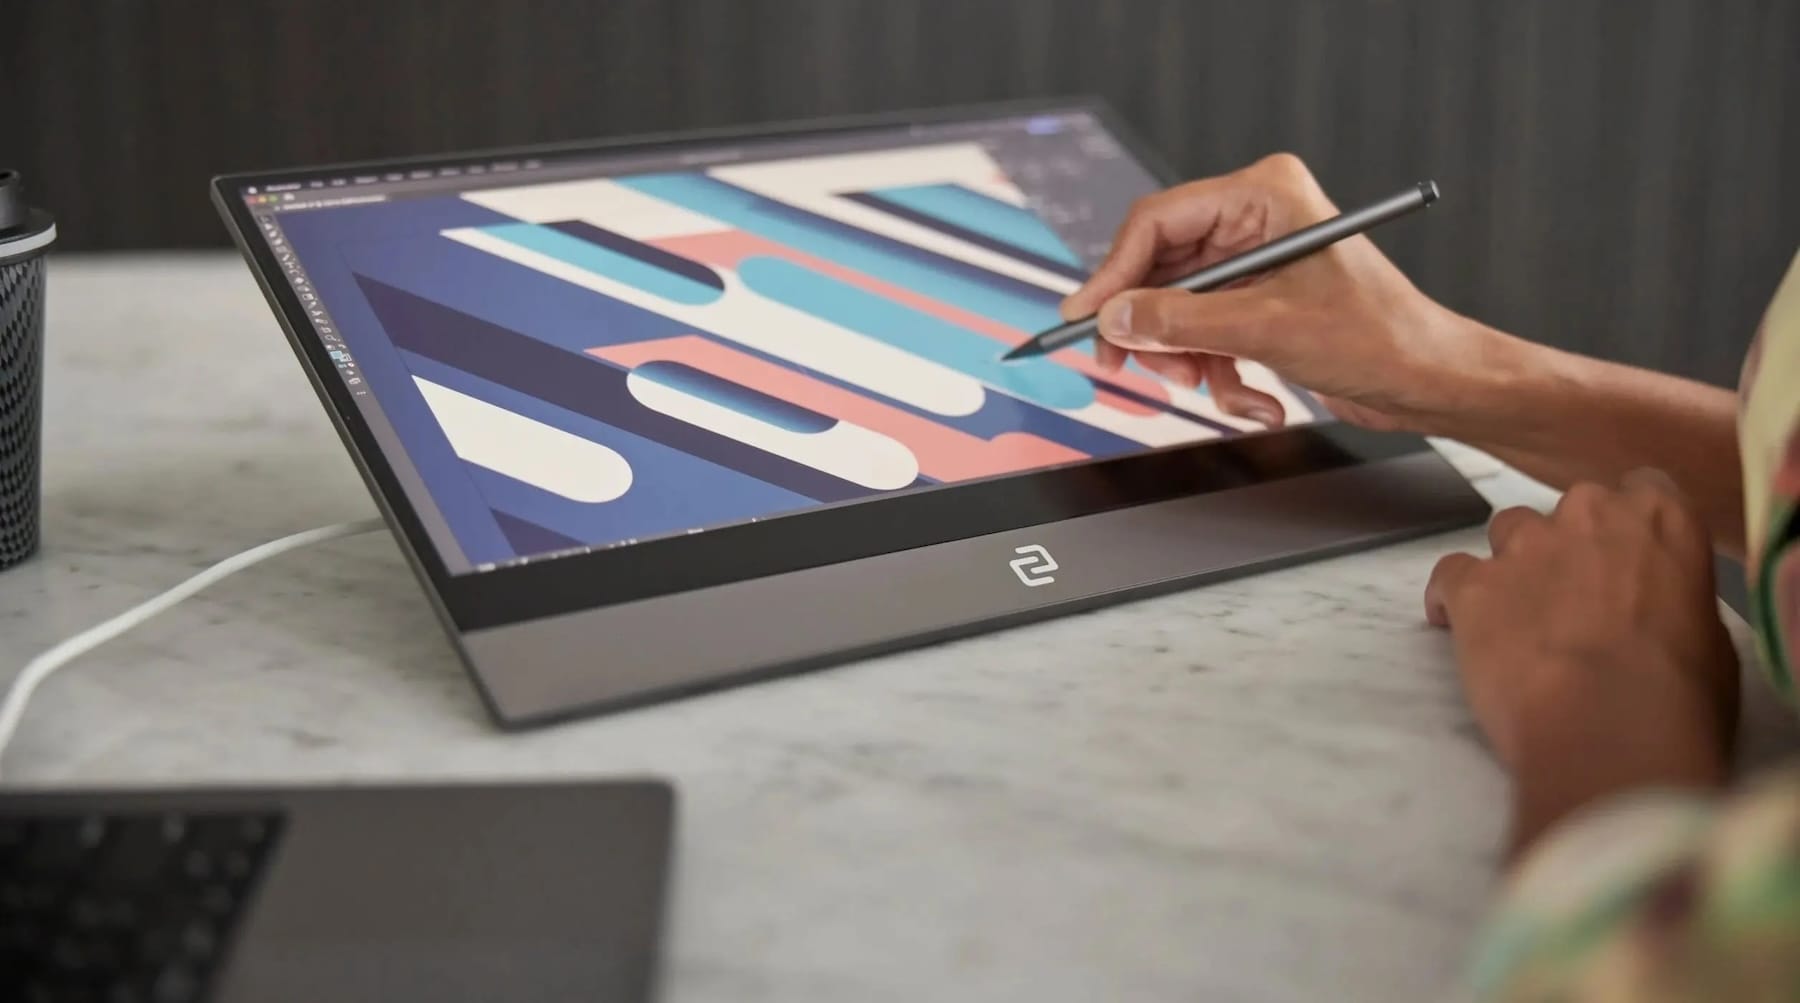 An Espresso screen in a 'tablet' mode with a hand drawing on screen.